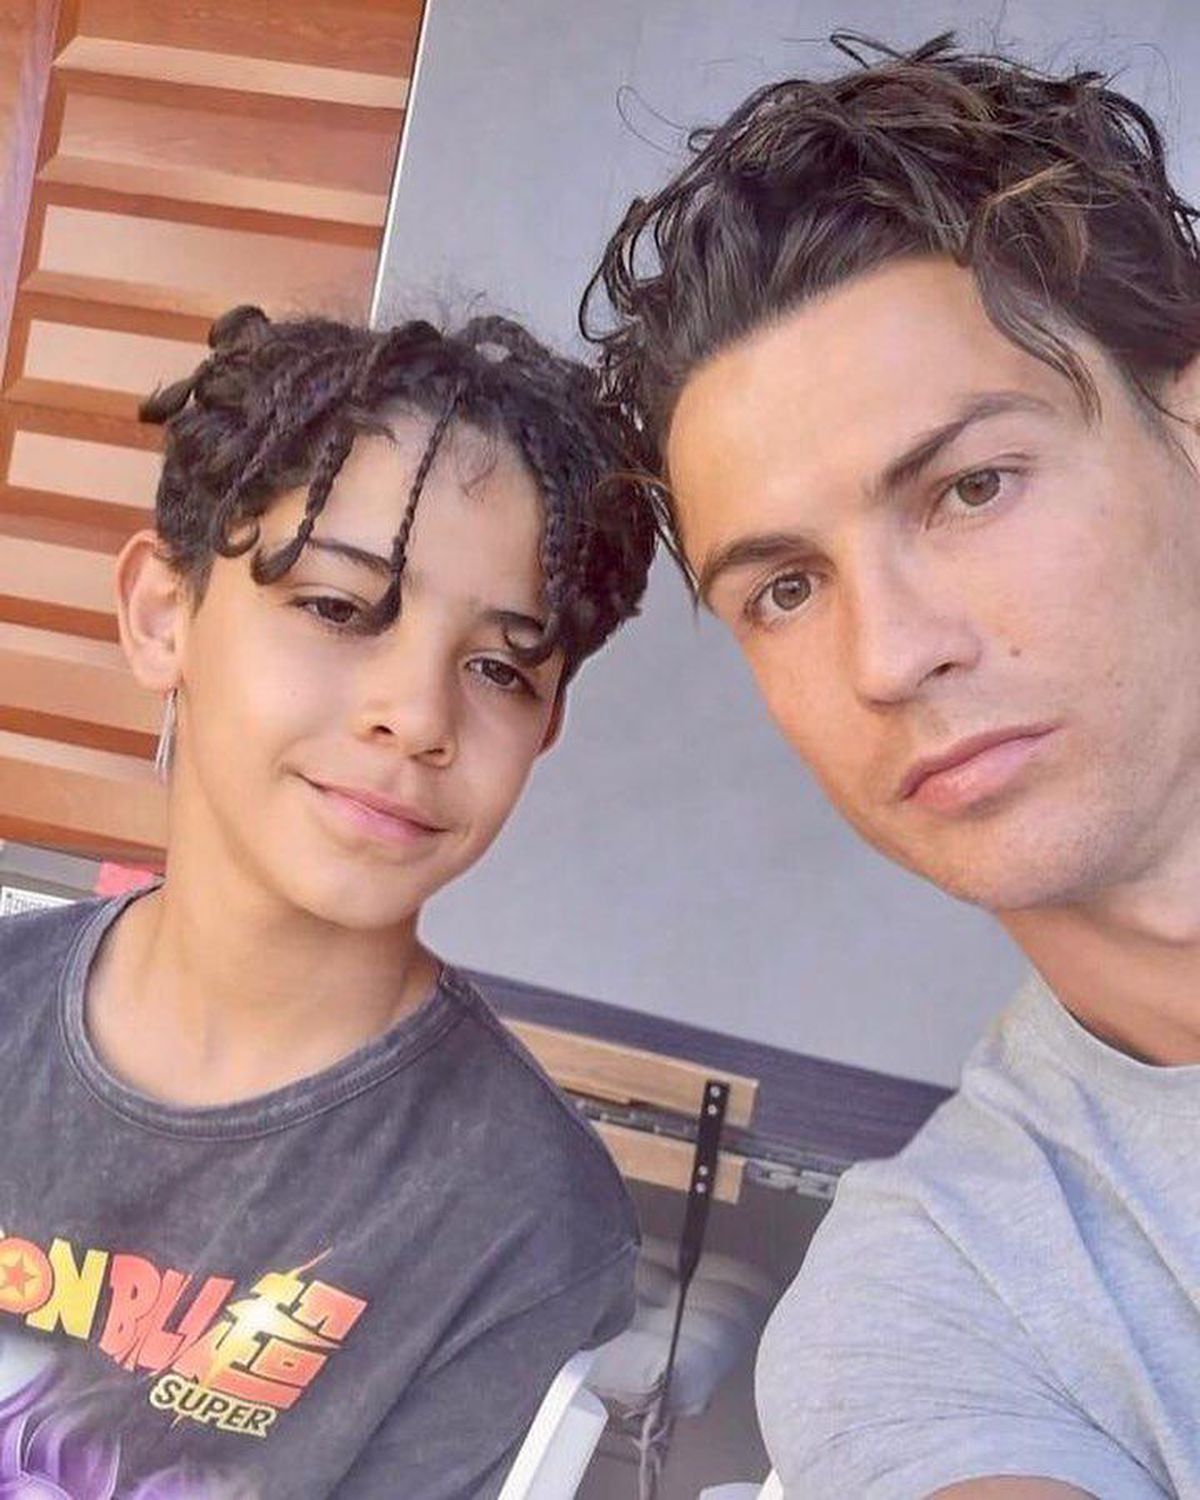 Cristiano Ronaldo’s latest Instagram post as of Friday. The soccer superstar is pictured here with his son. 